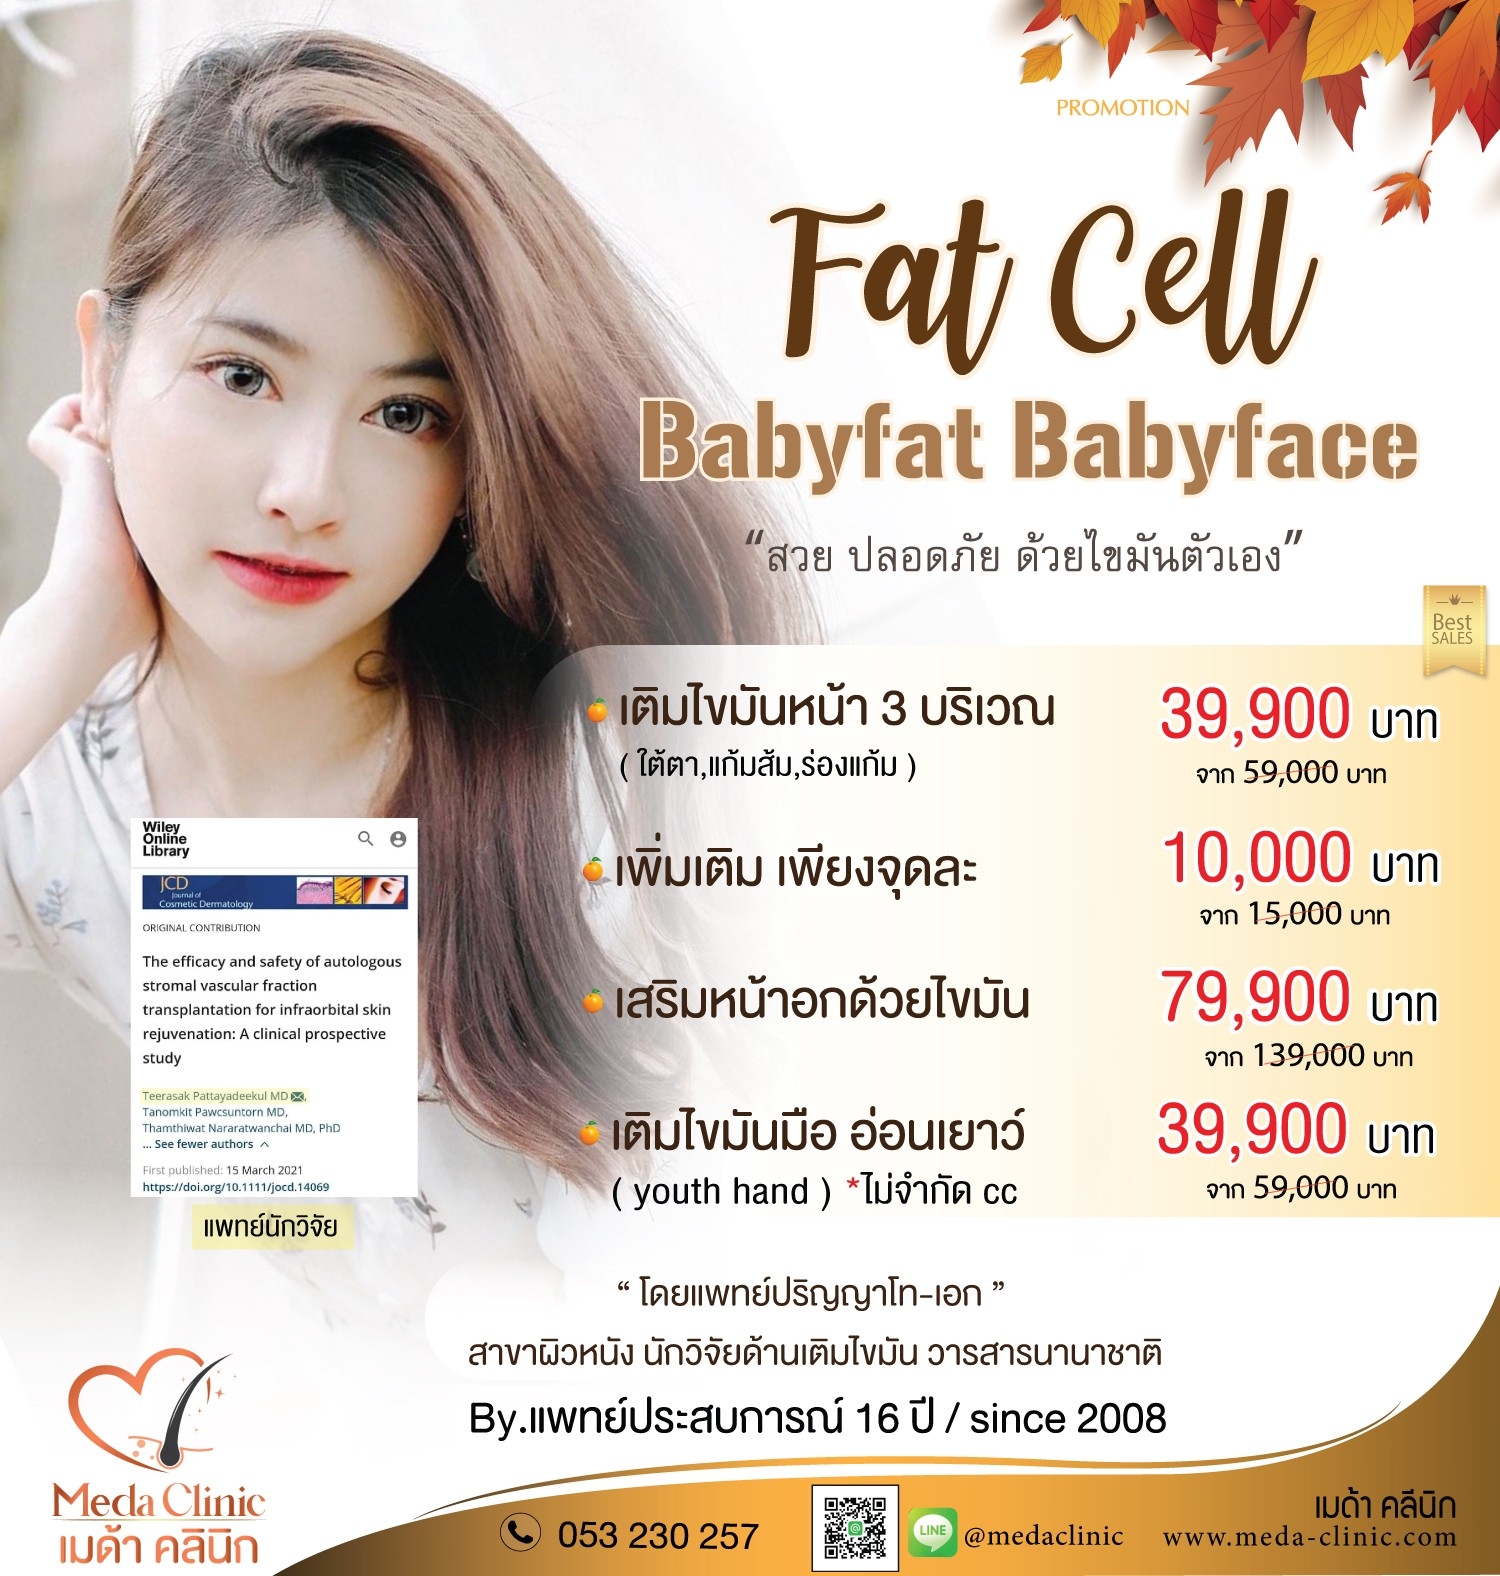 FAT CELL